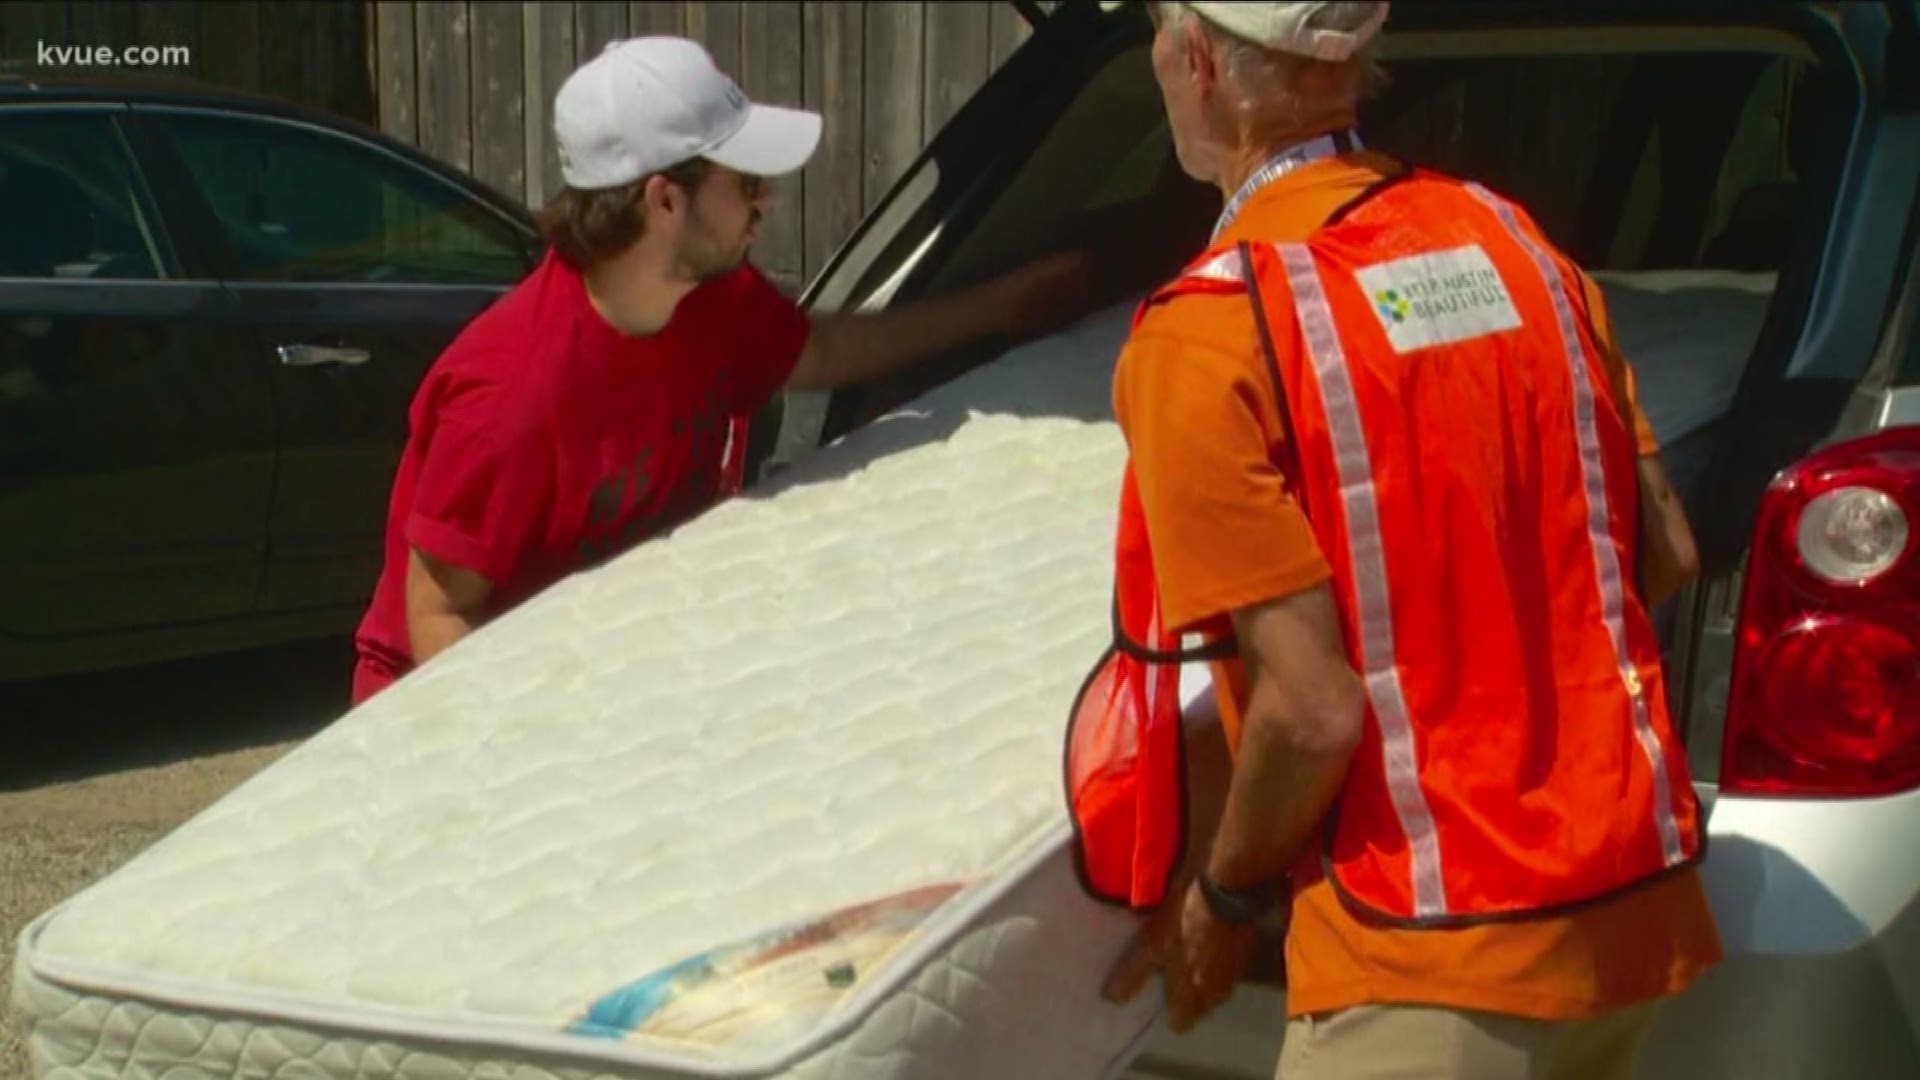 The City of Austin is helping UT students get rid of unwanted furniture and other items.